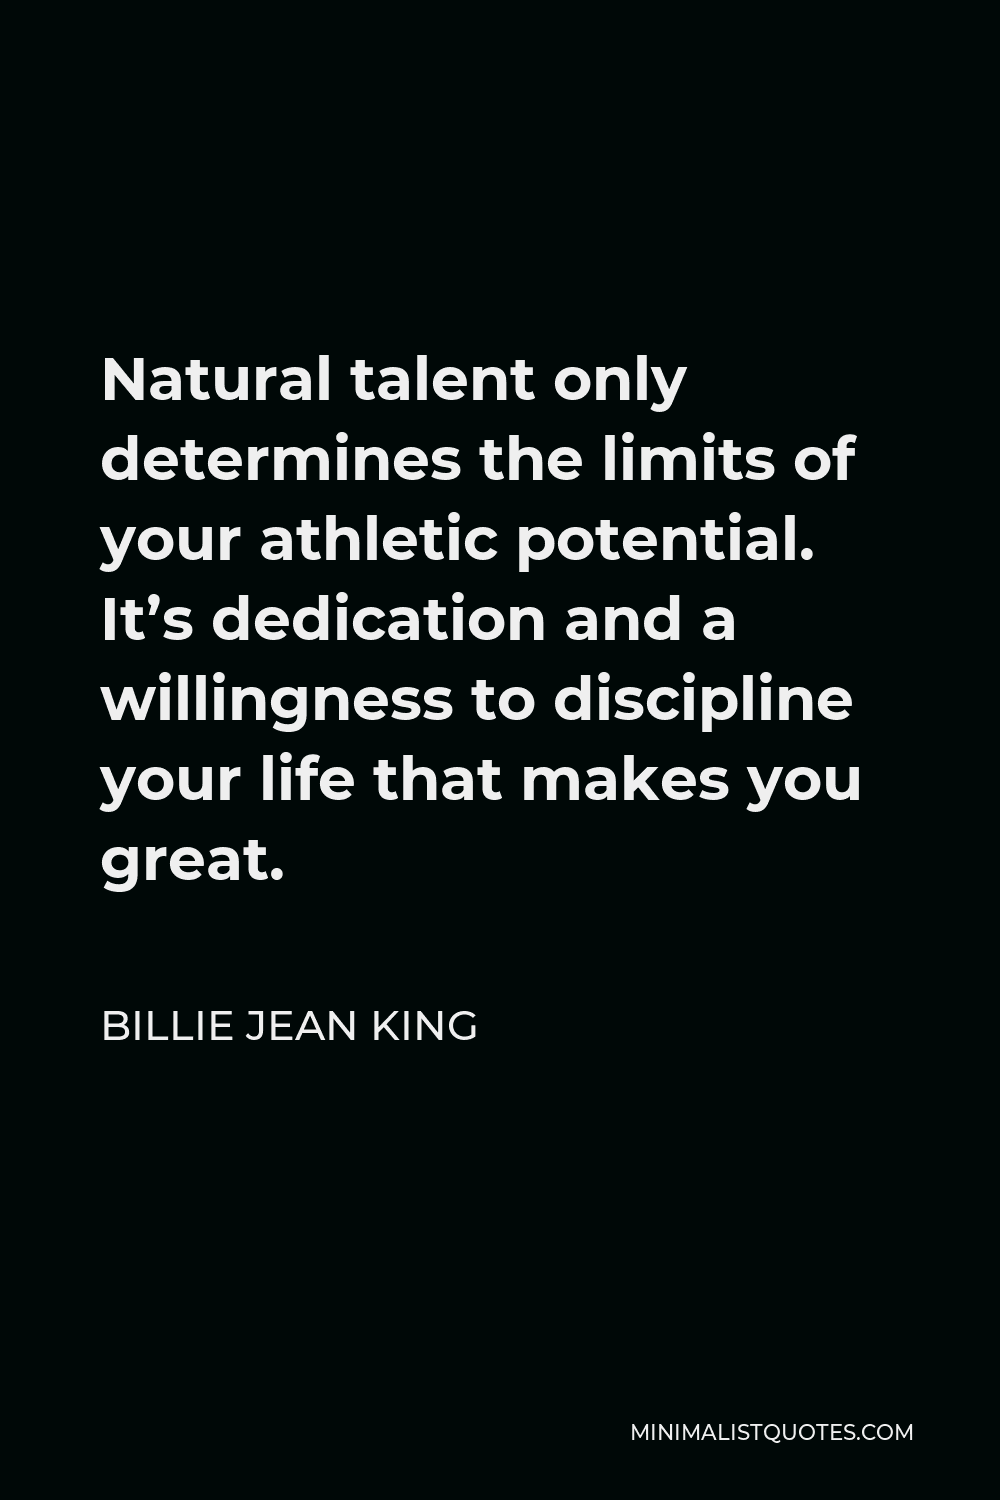 Billie Jean King Quote - Natural talent only determines the limits of your athletic potential. It’s dedication and a willingness to discipline your life that makes you great.